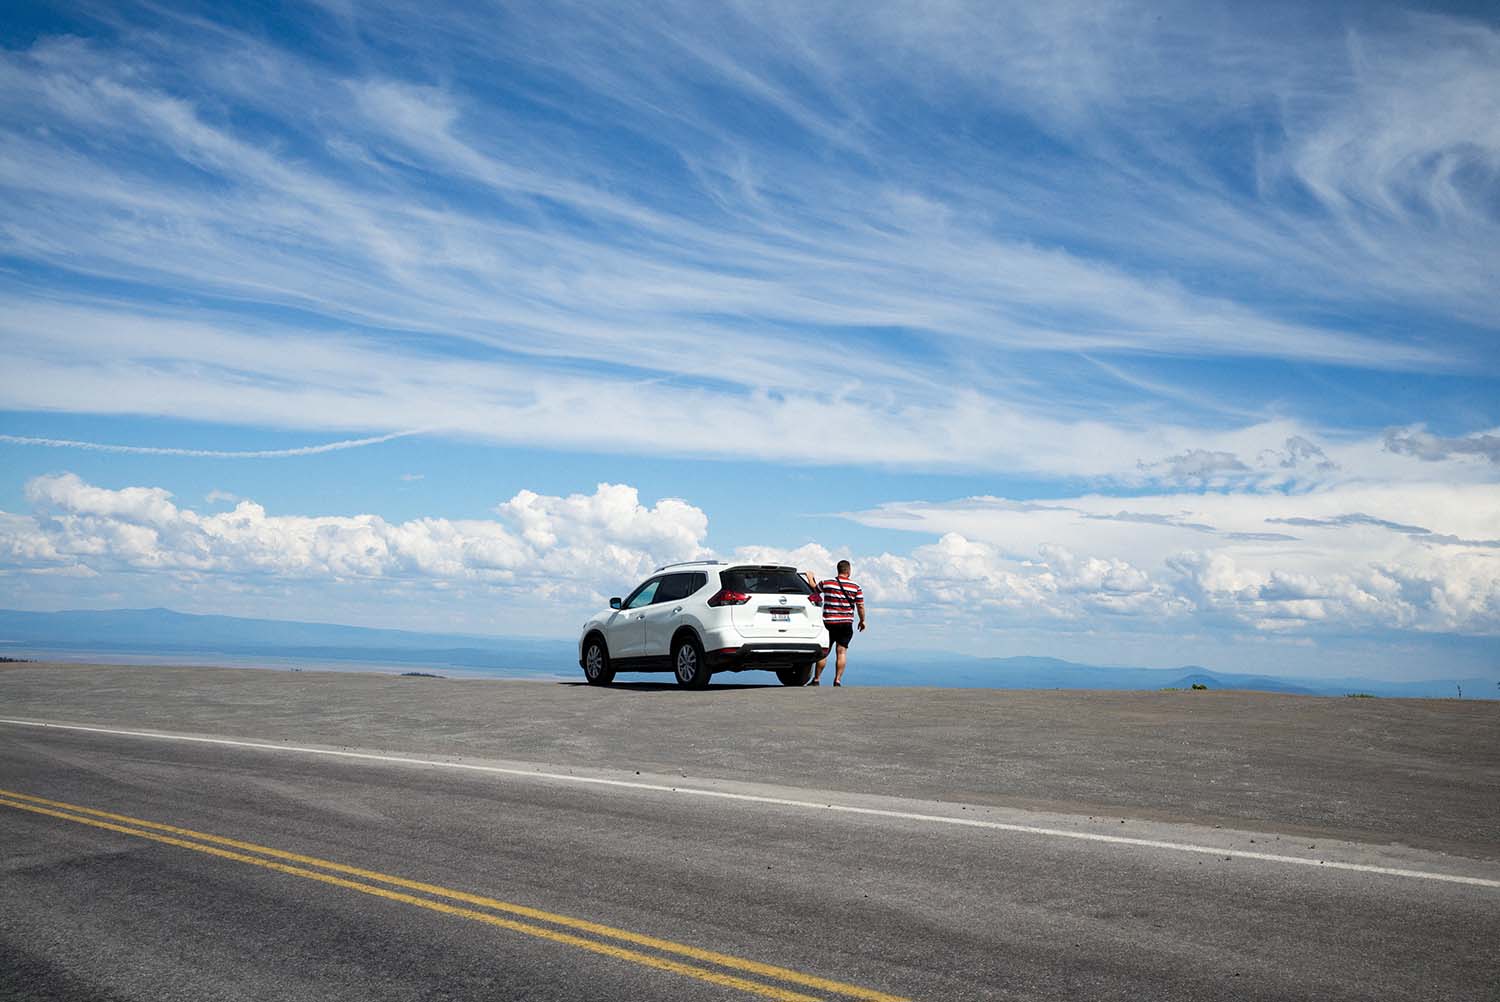 Planning for a Road trip? Here's what your Auto Insurance should cover